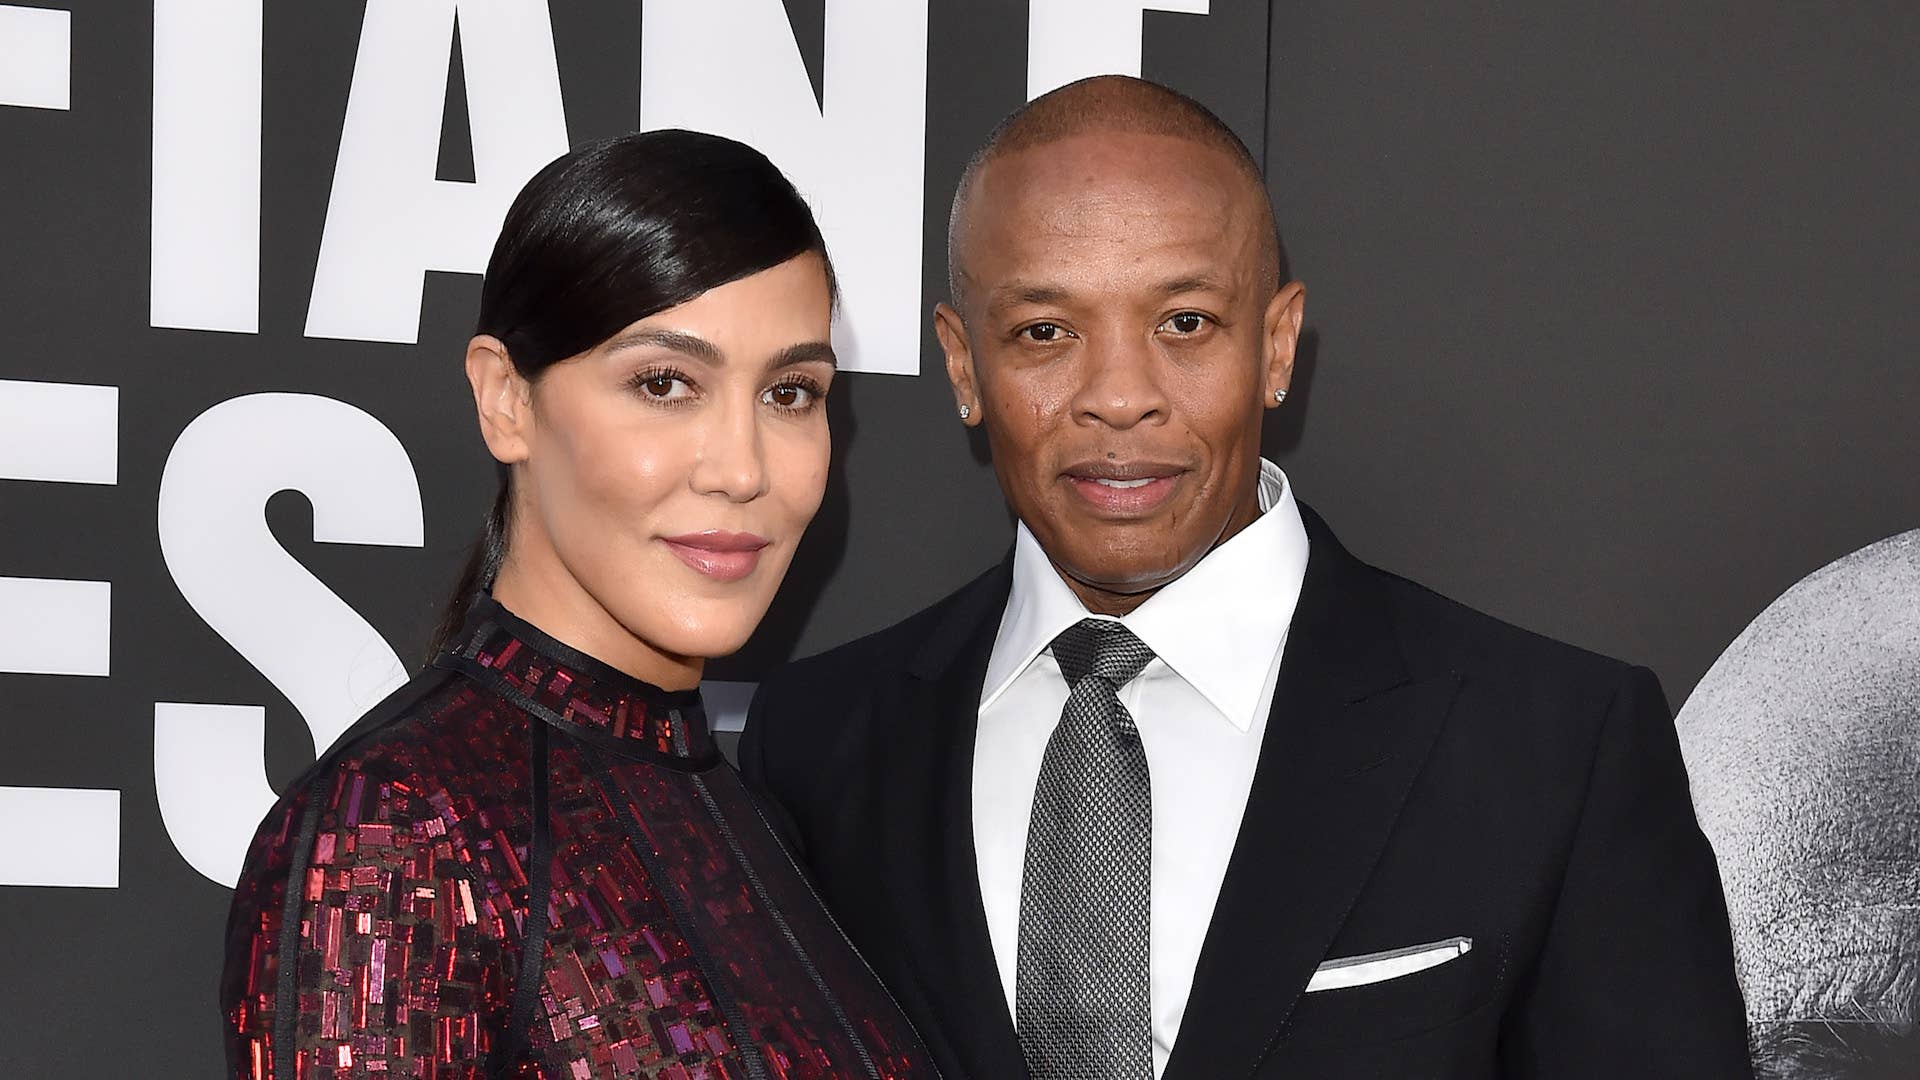 Dr. Dre and wife Nicole Young arrive at the premiere of 'The Defiant Ones.'